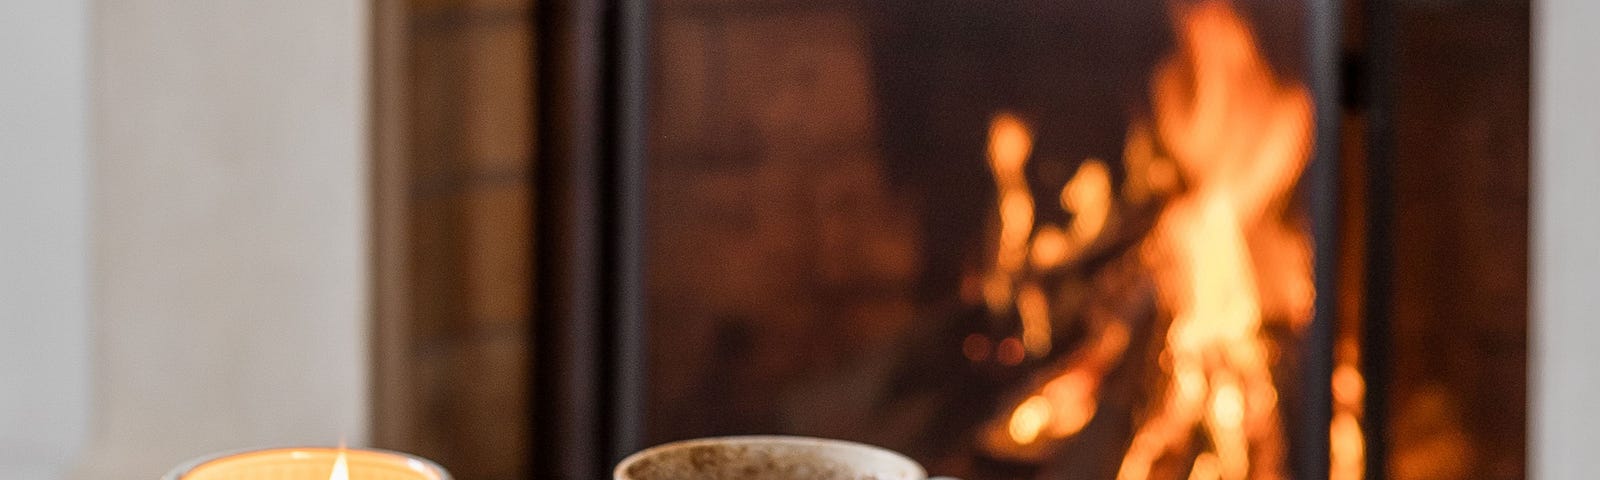 A warm coffee, a glowing candle and a notebook and pen, in front of a roaring fire in a fireplace.